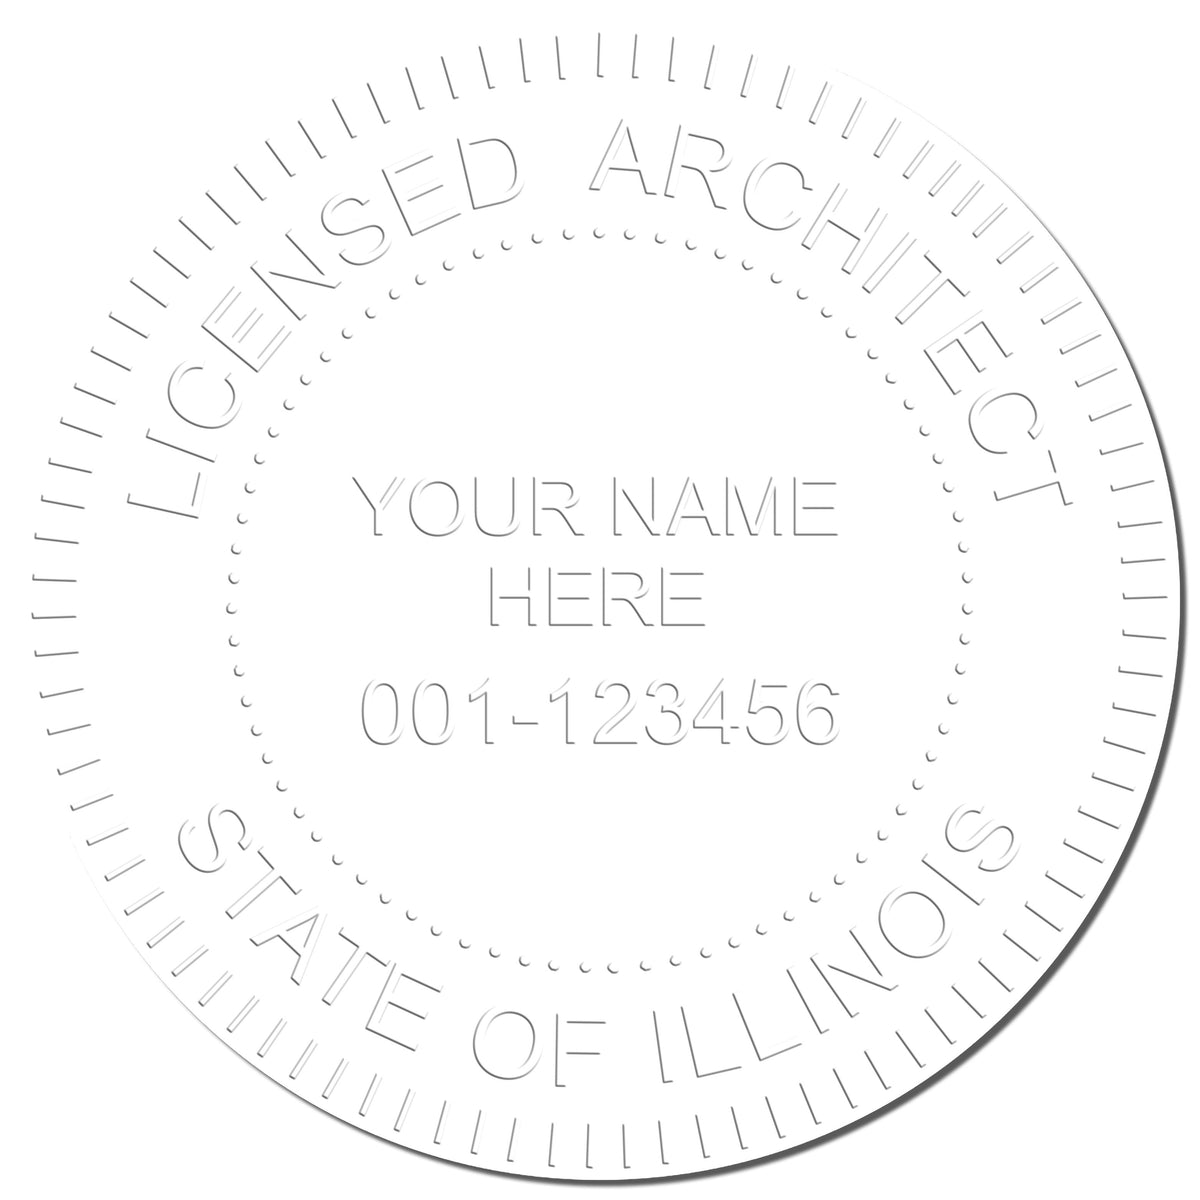 This paper is stamped with a sample imprint of the Heavy Duty Cast Iron Illinois Architect Embosser, signifying its quality and reliability.